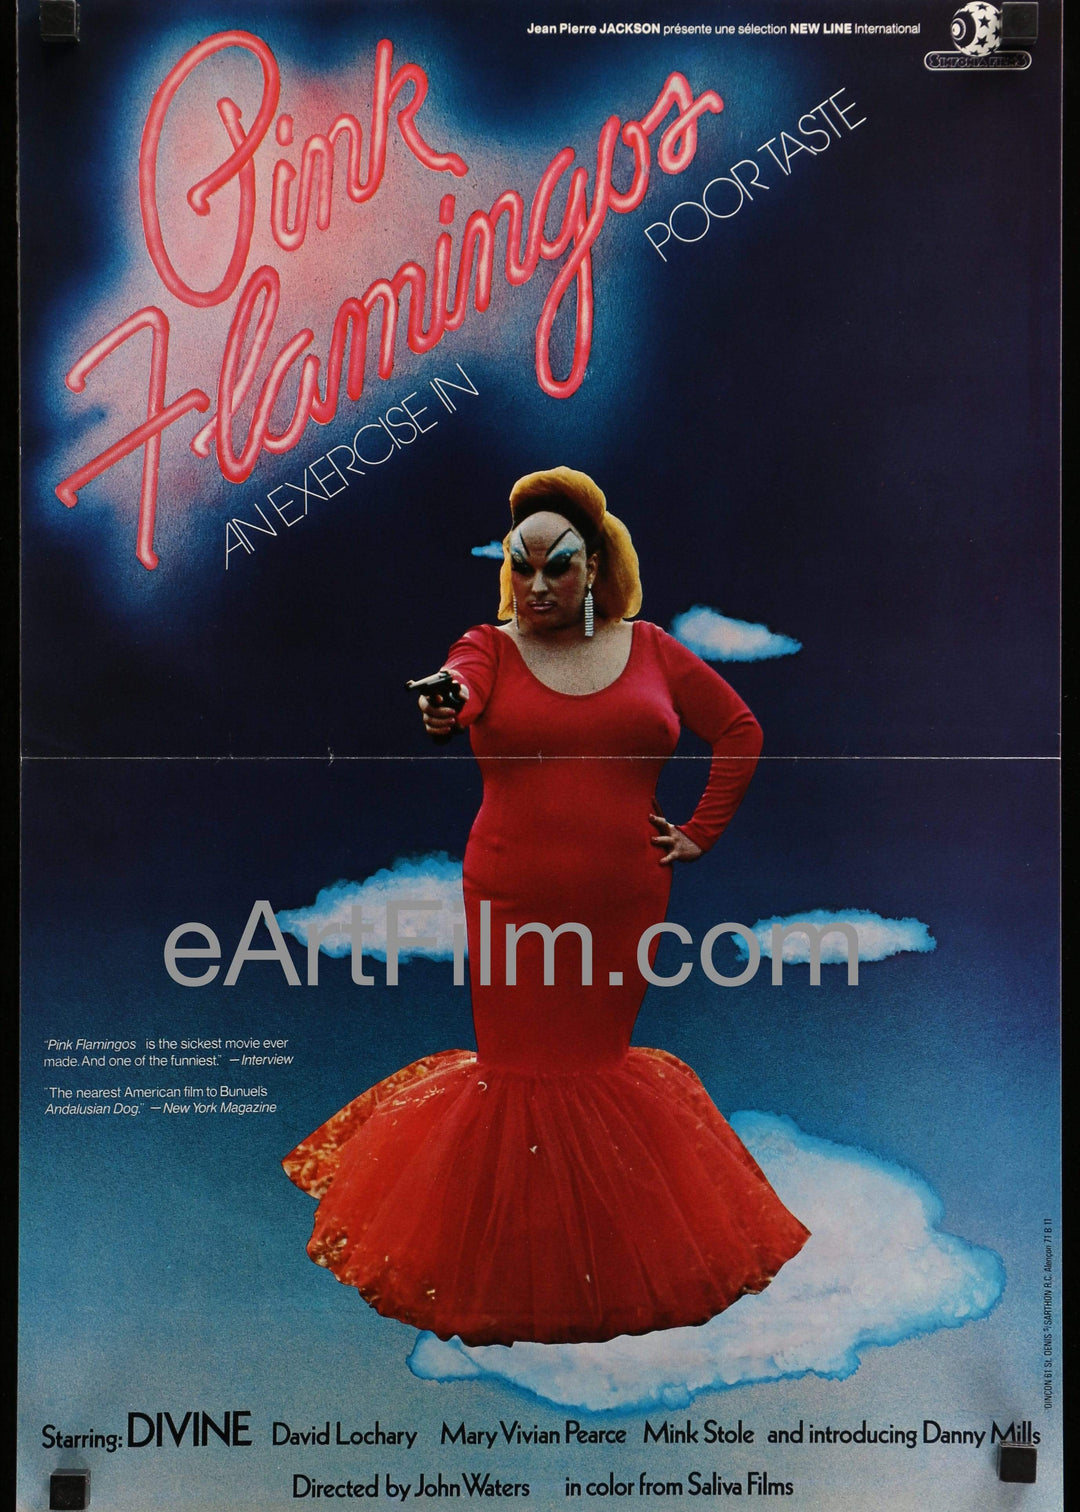 eArtFilm.com French (15"x21.75") Pink Flamingos-1972-15x22-Divine-Mink Stole-John Waters exercise in bad taste